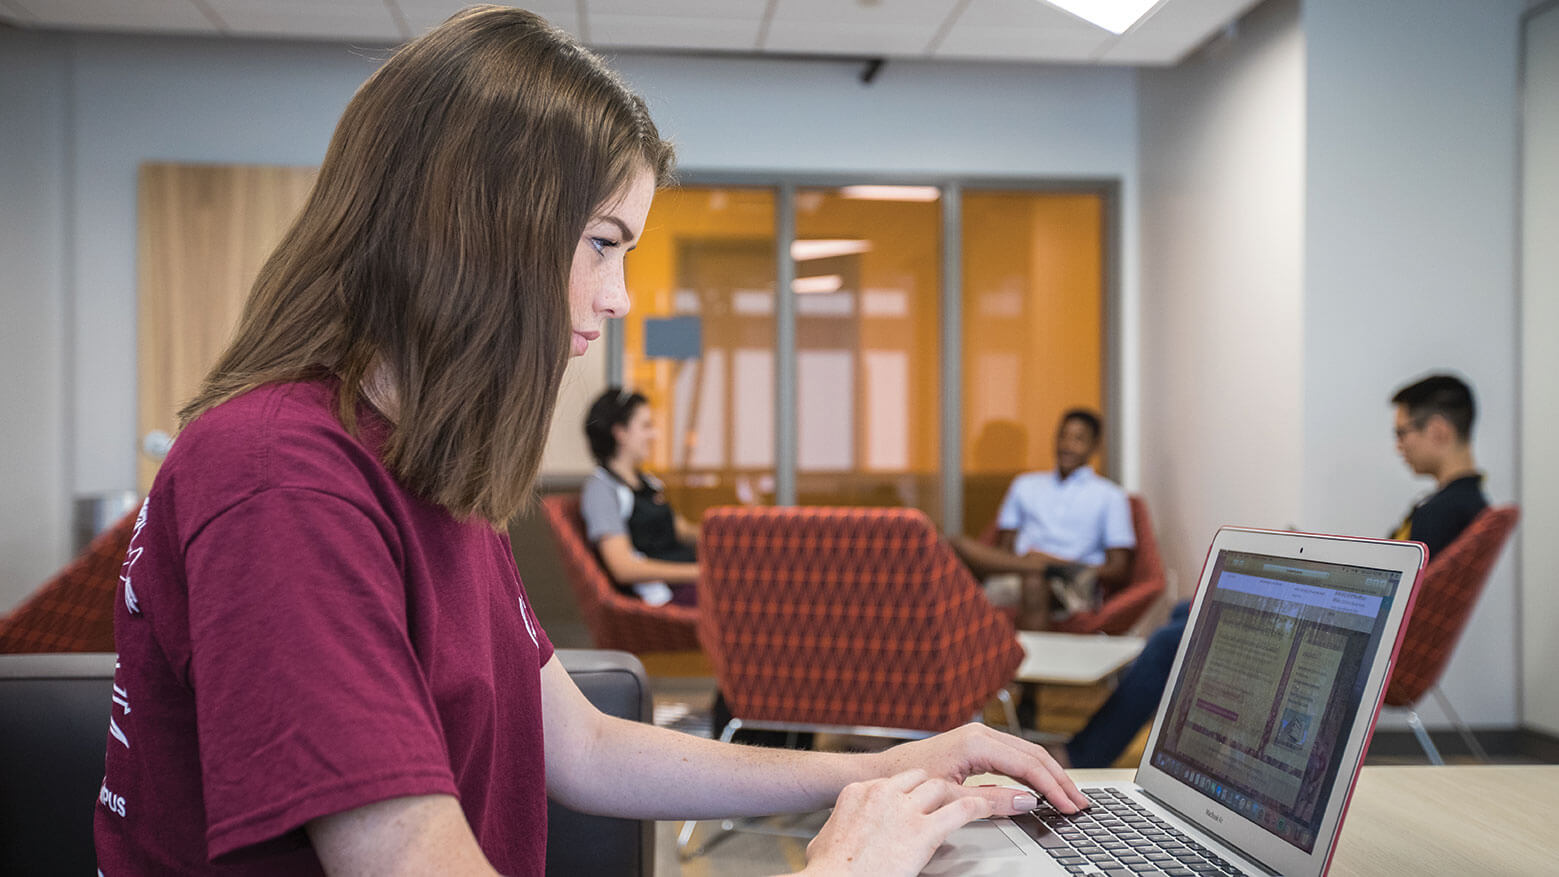 A student sits in a lounge area studying with an open laptop in front of her